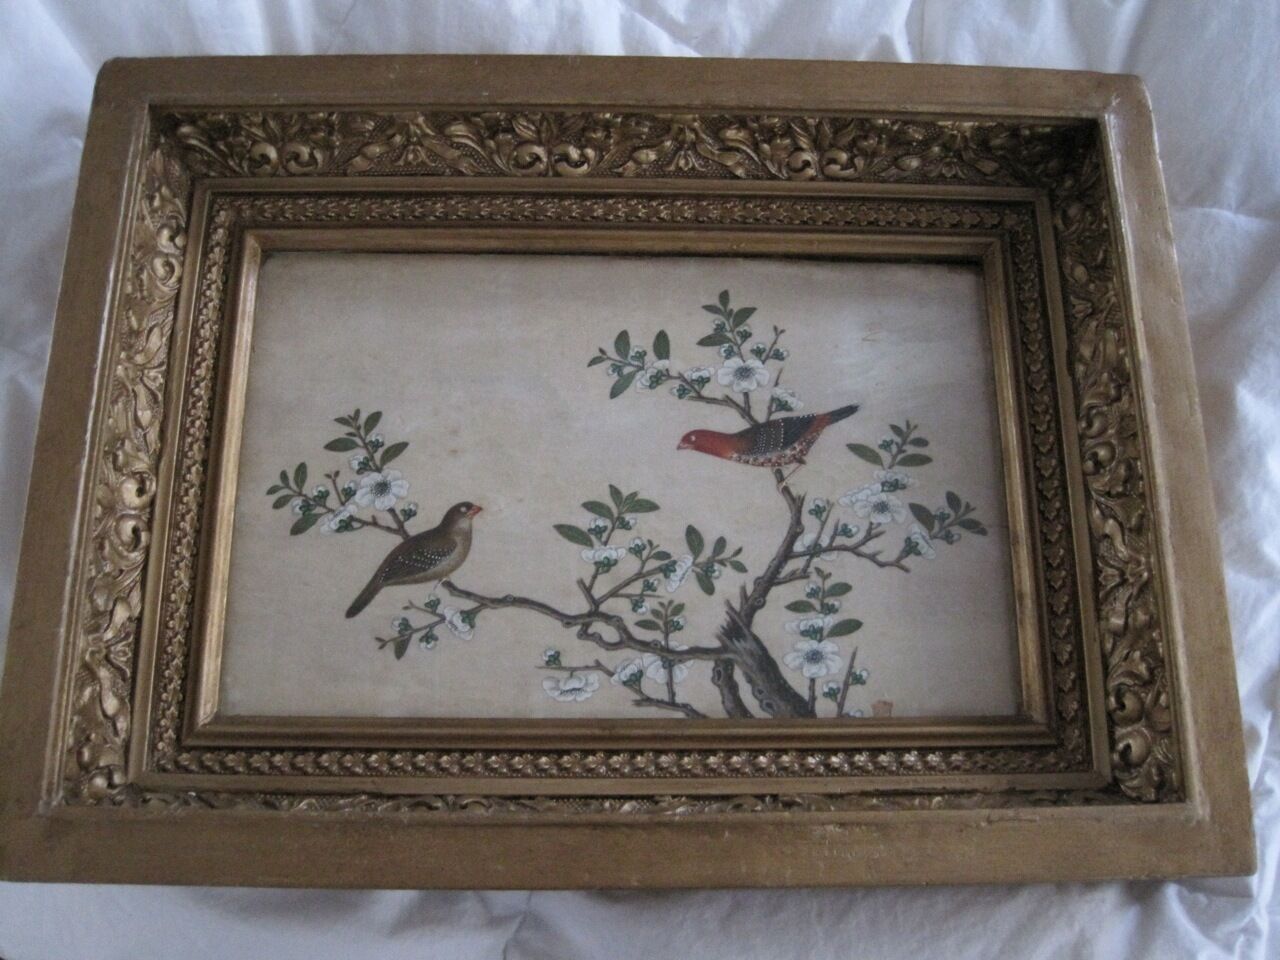 Antique 19c Chinese Export Watercolor Birds & Flowering Tree on Pith Paper c1840